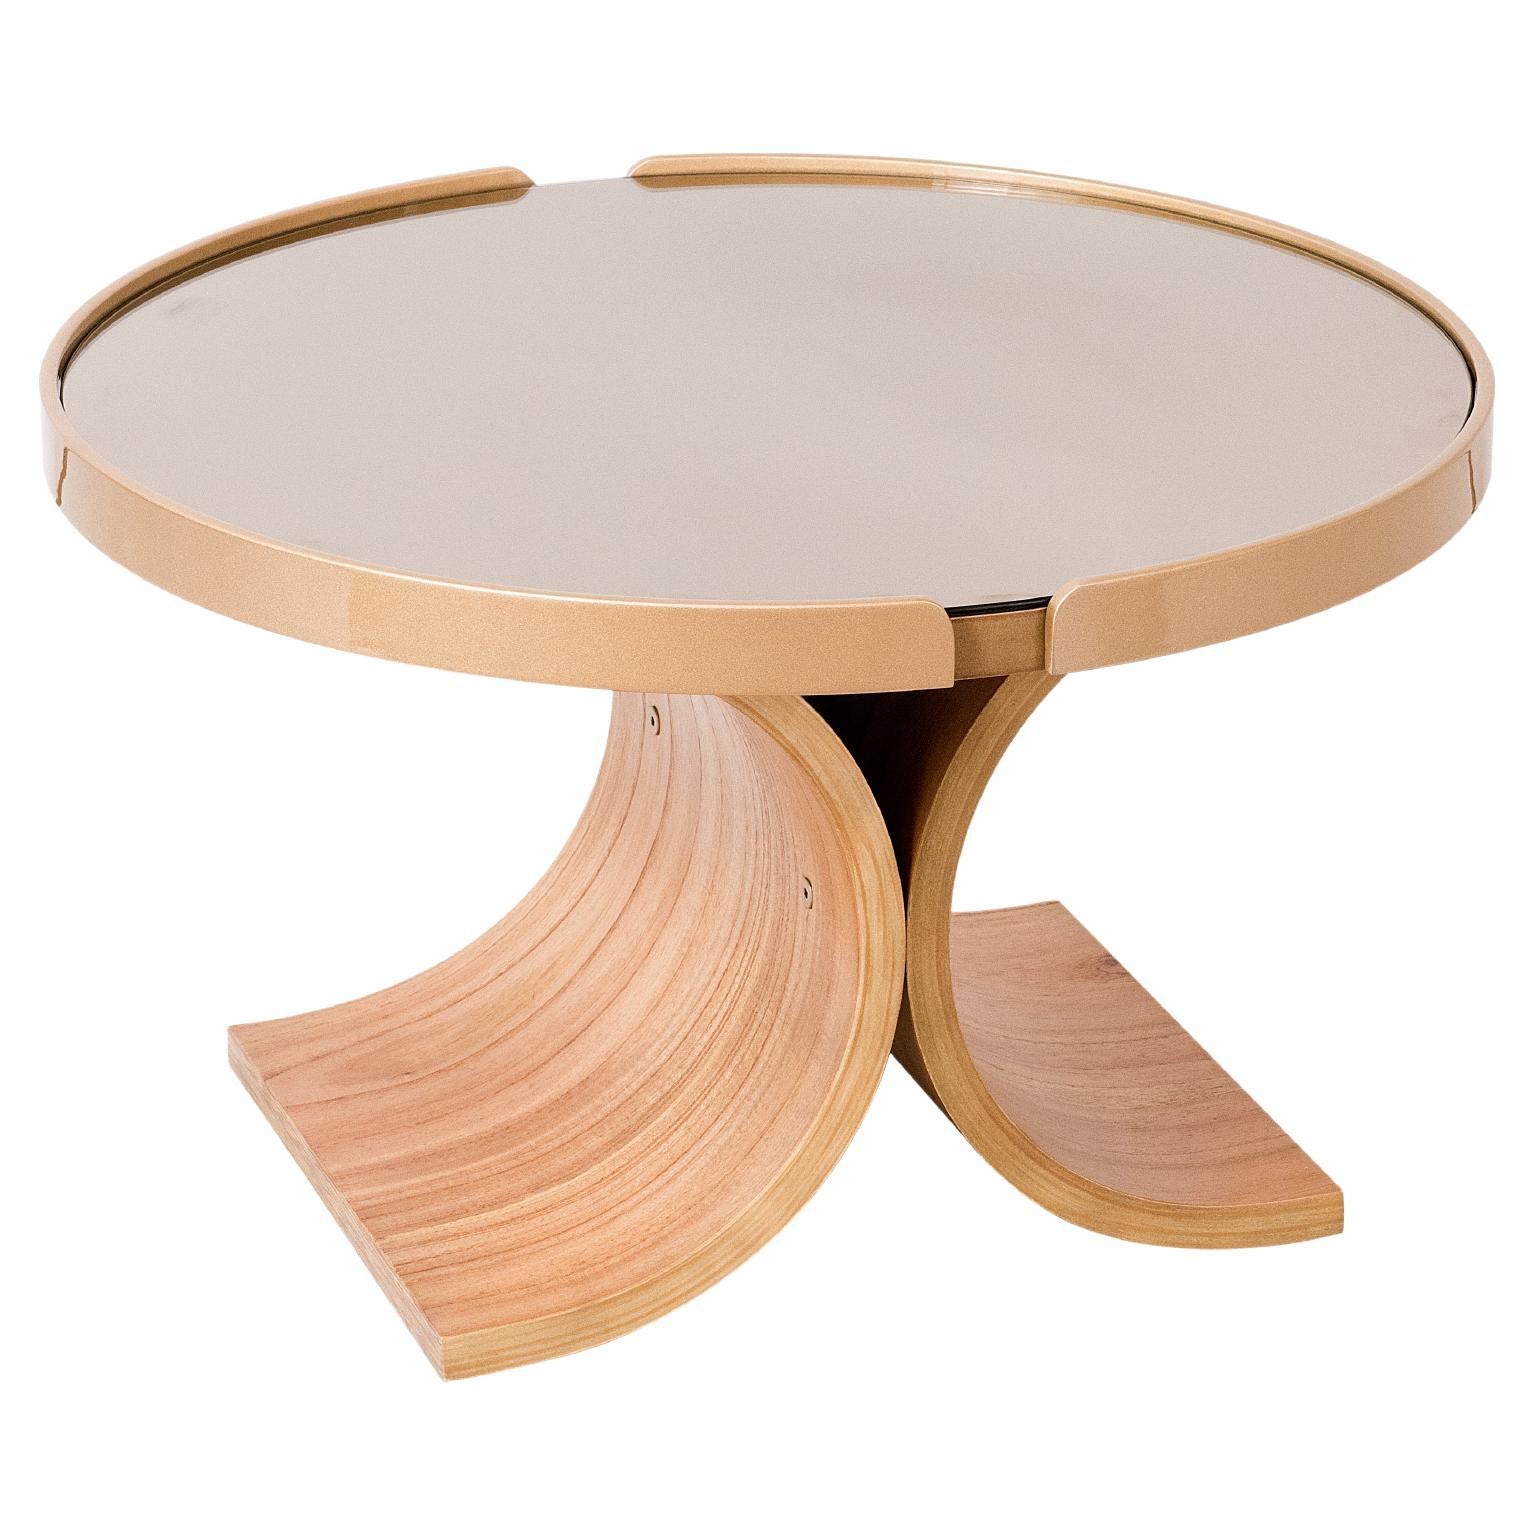 "Regia" Center Table in Curved Cinnamon Wood Multi-laminate and Top in Mirror For Sale